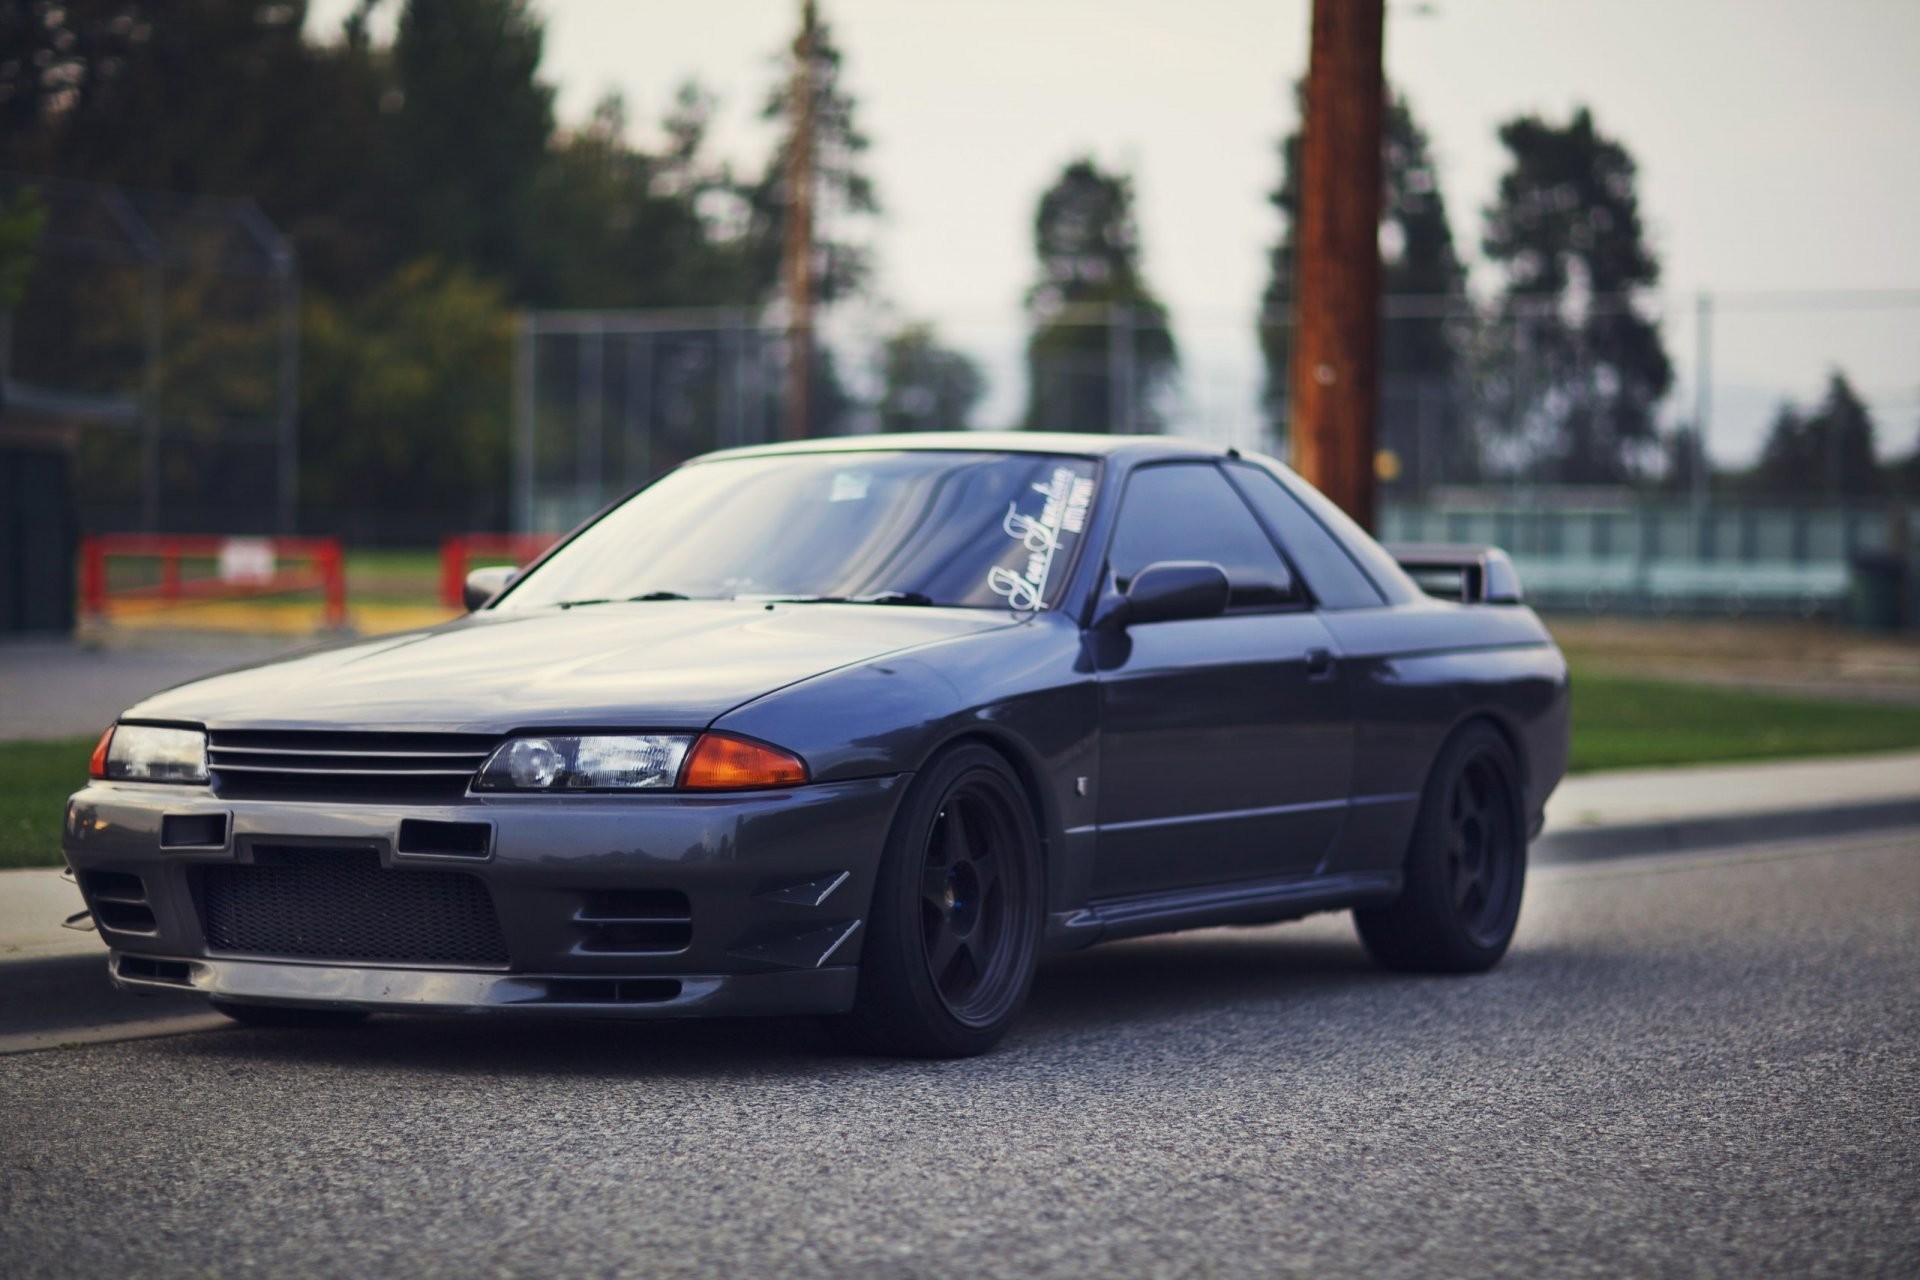 Skyline R32 Wallpapers 66 Images